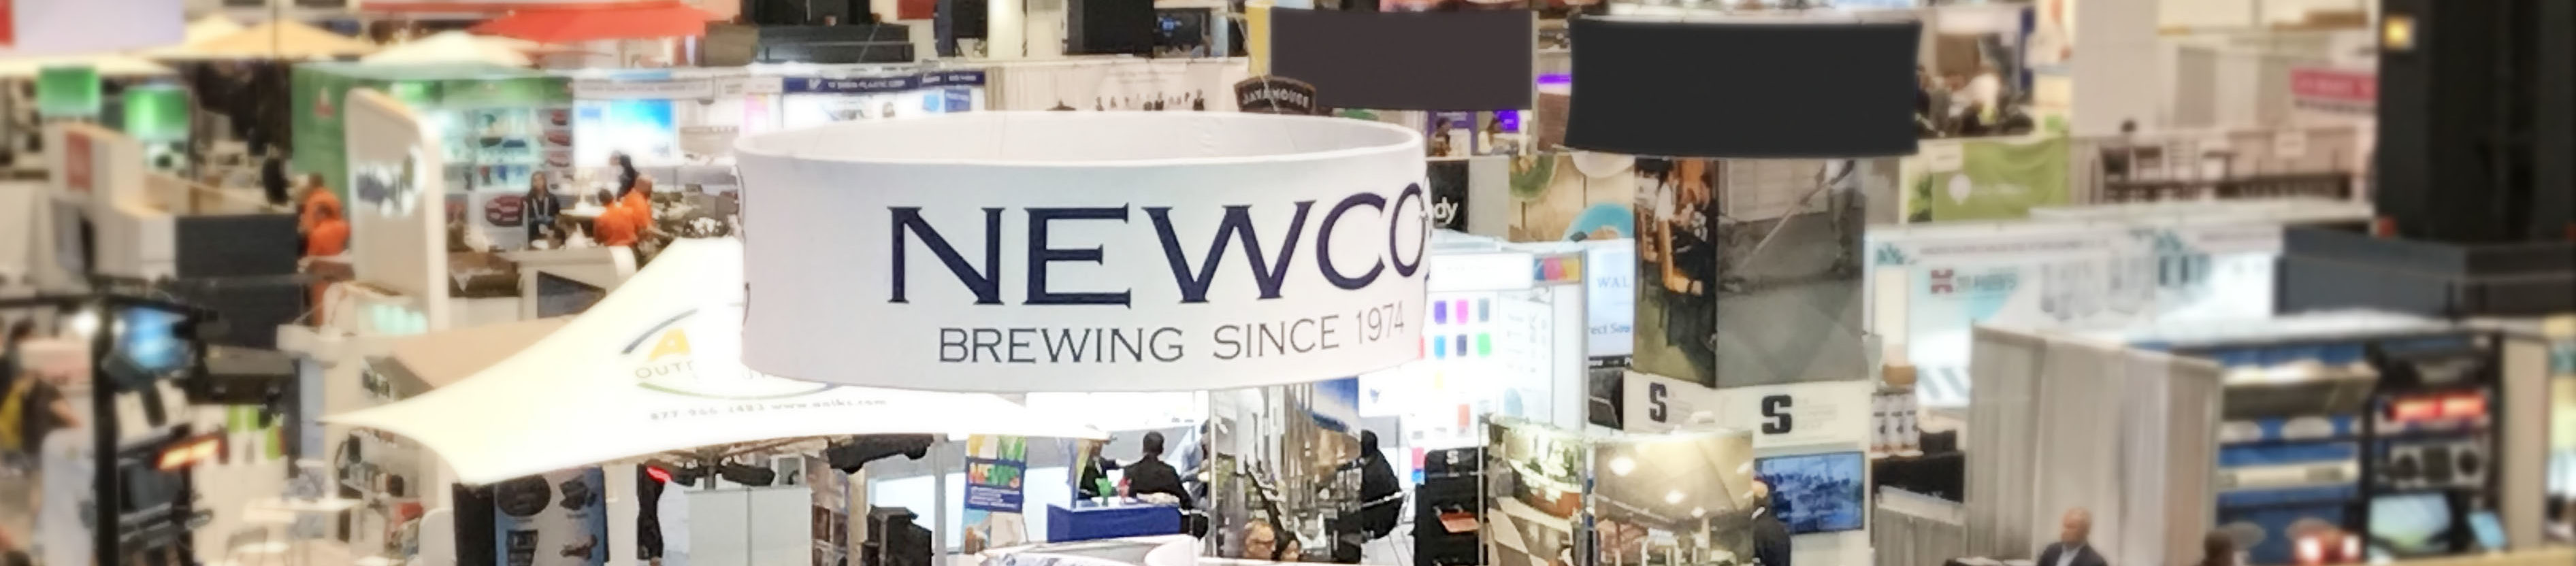 newc's trade shows booth